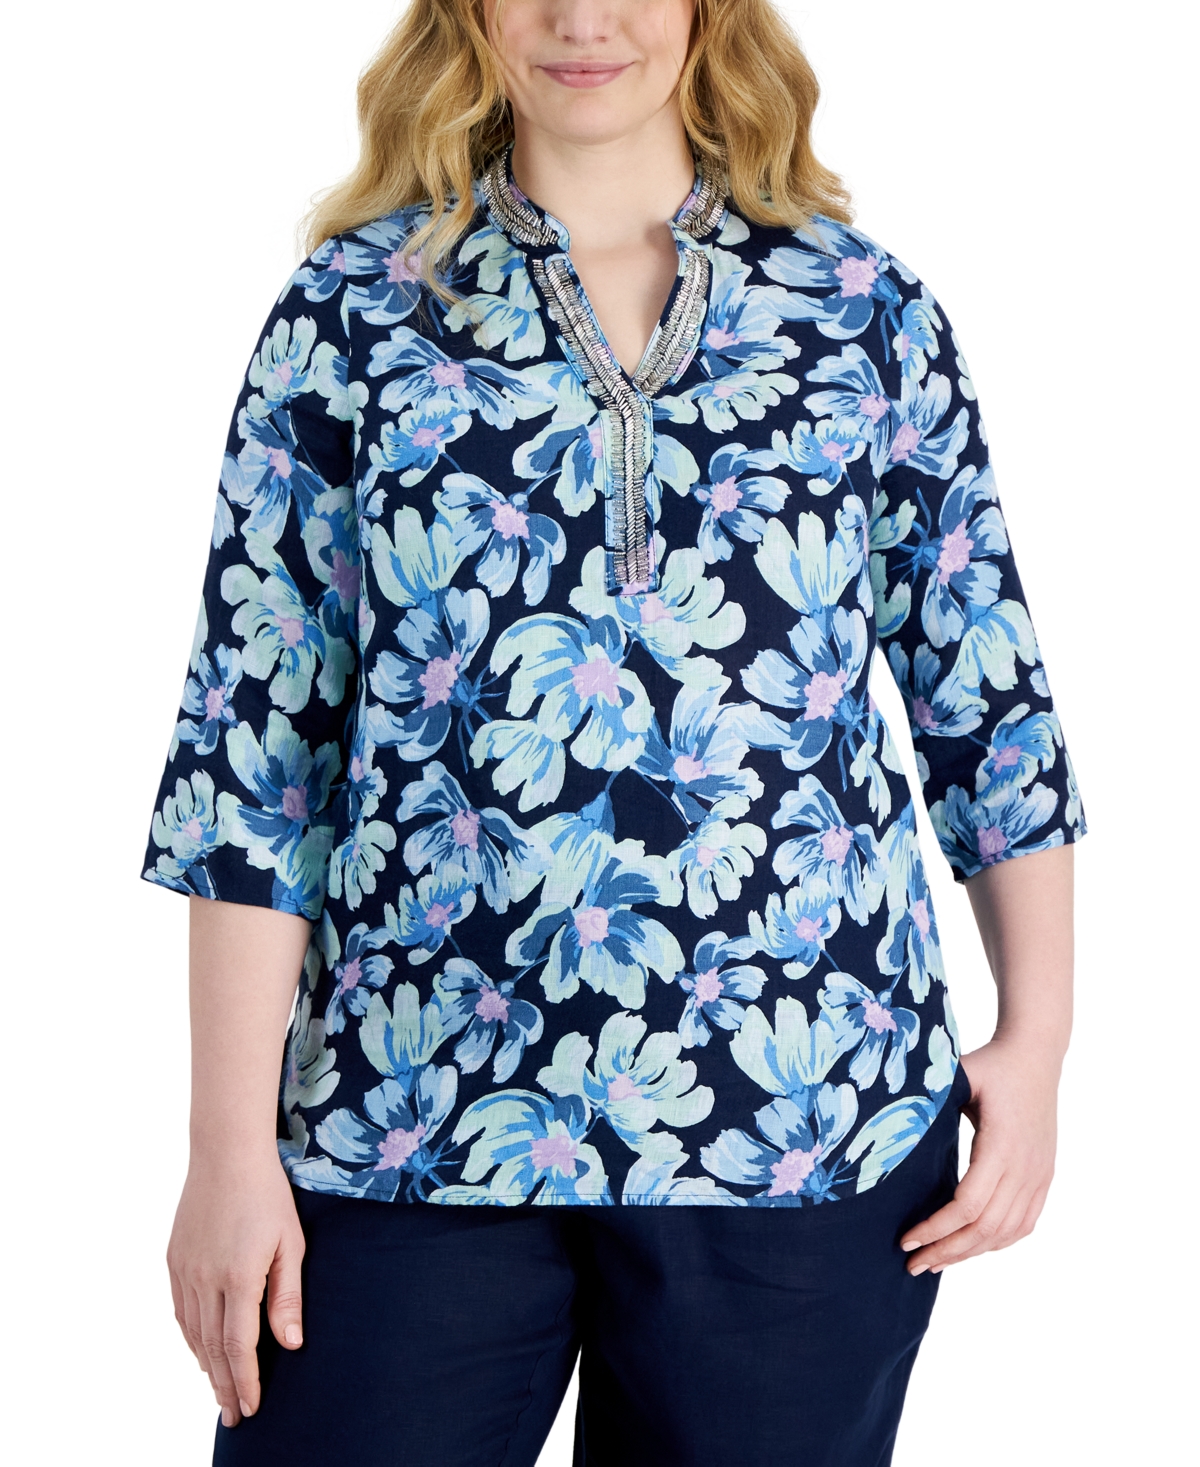 Plus Size 100% Linen Embellished Split-Neck Tunic Top, Created for Macy's - Intrepid Blue Combo